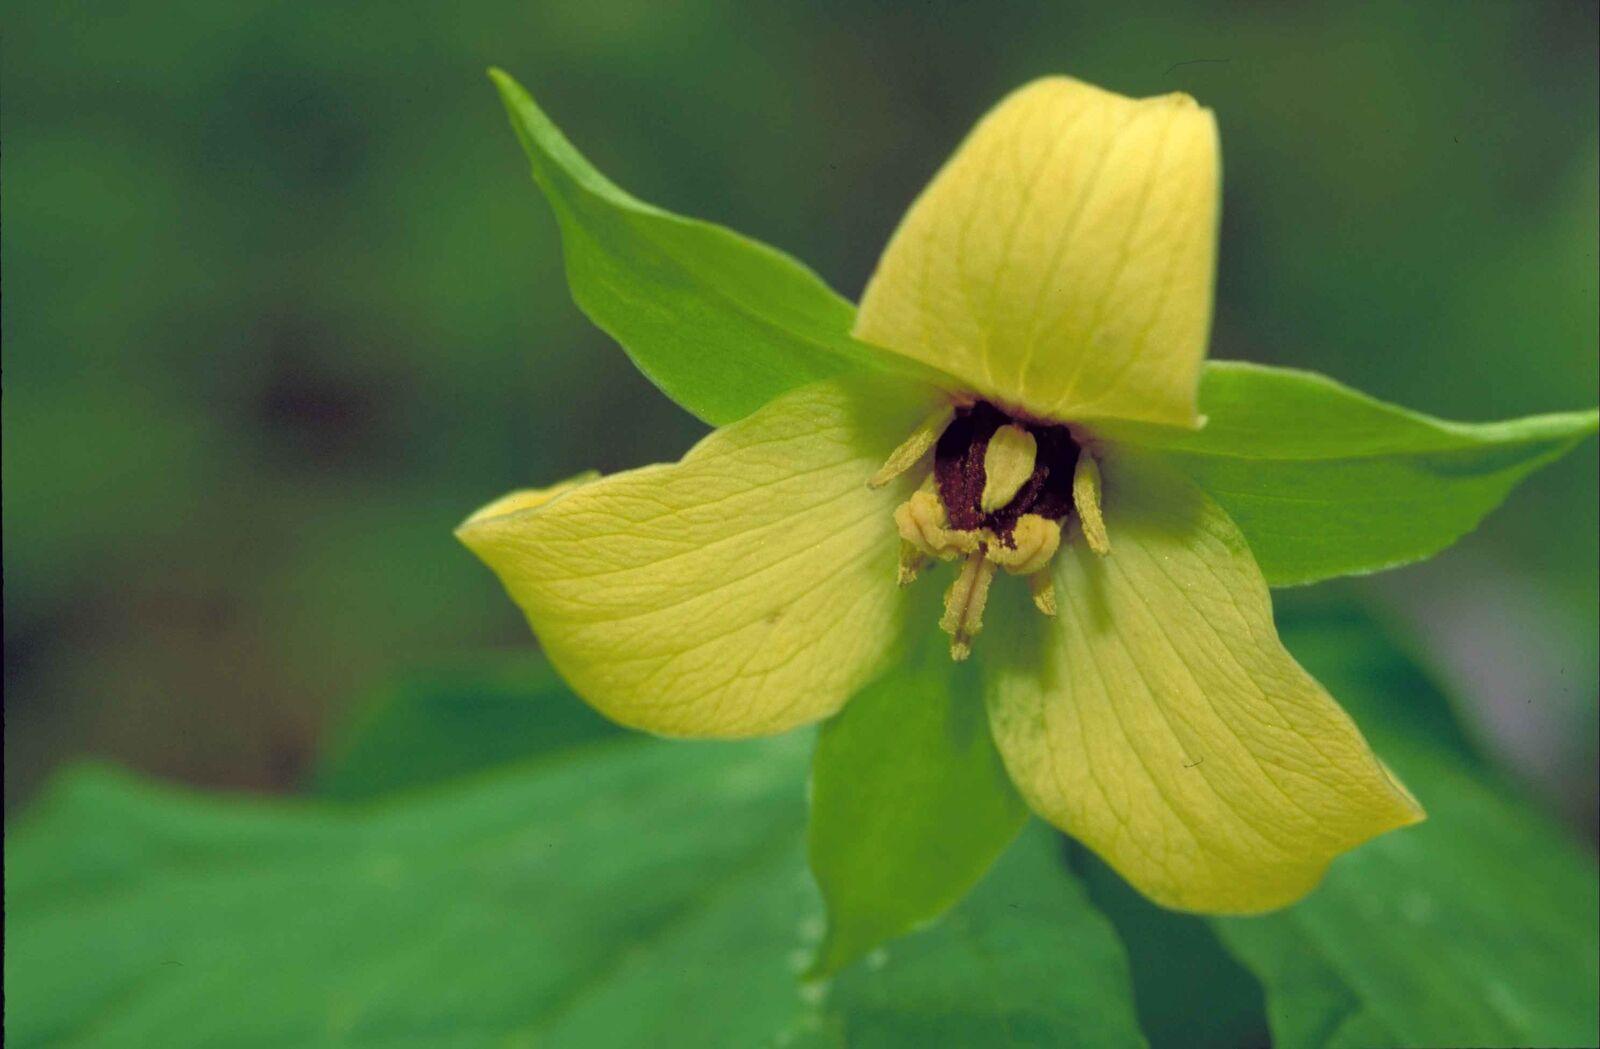 20 Yellow Trillium Root Systems/Bulbs, Wildflower, Yellow Wake Robin - T. luteum - The Nursery Center